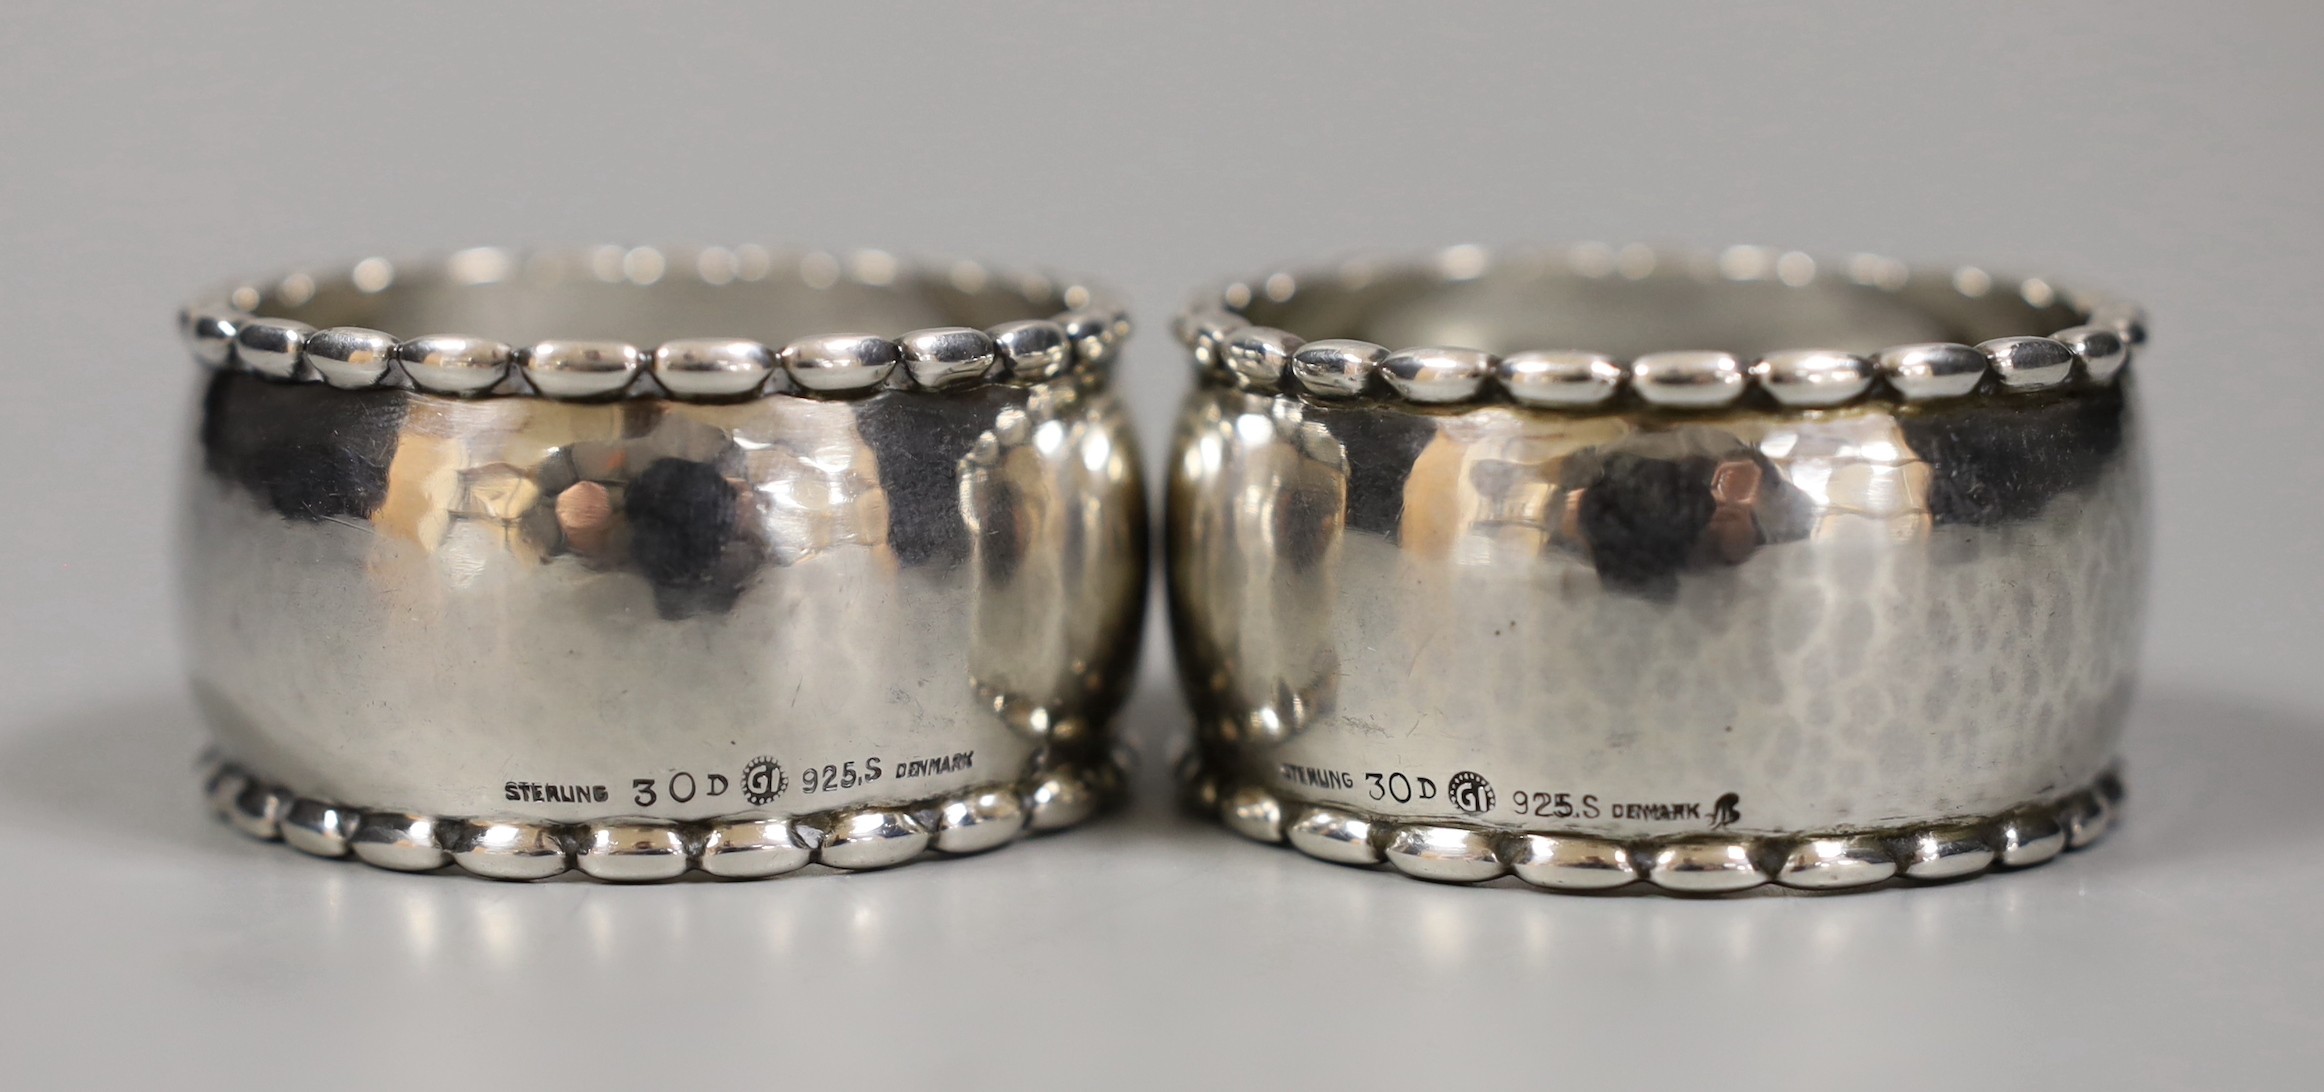 A pair of Georg Jensen sterling napkin rings, numbered 30D, 54mm.